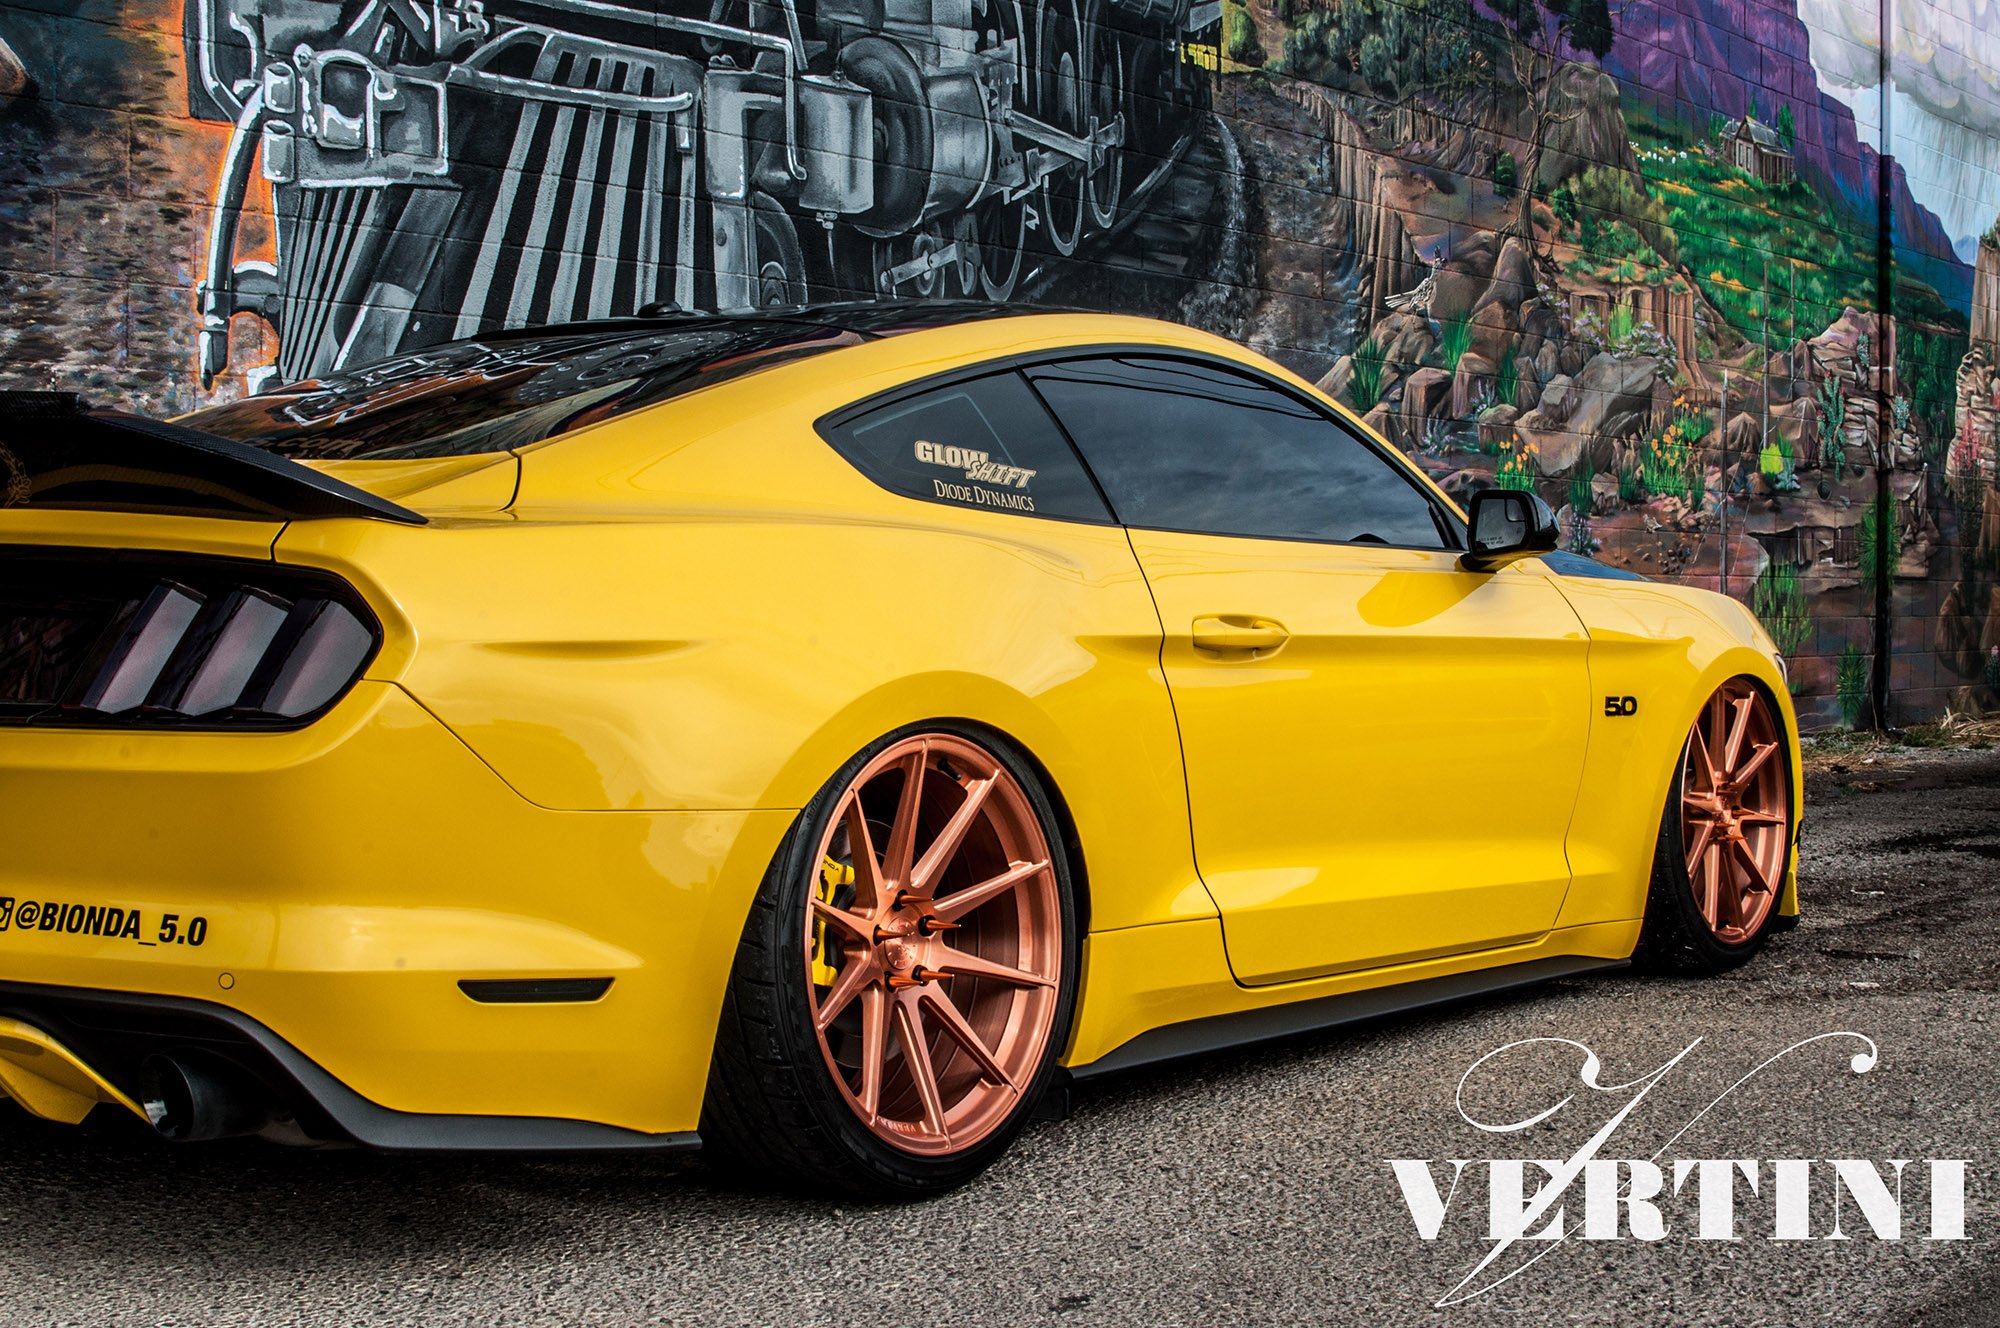 Carbon Fiber Rear Spoiler on Yellow Ford Mustang - Photo by Vertini Wheels